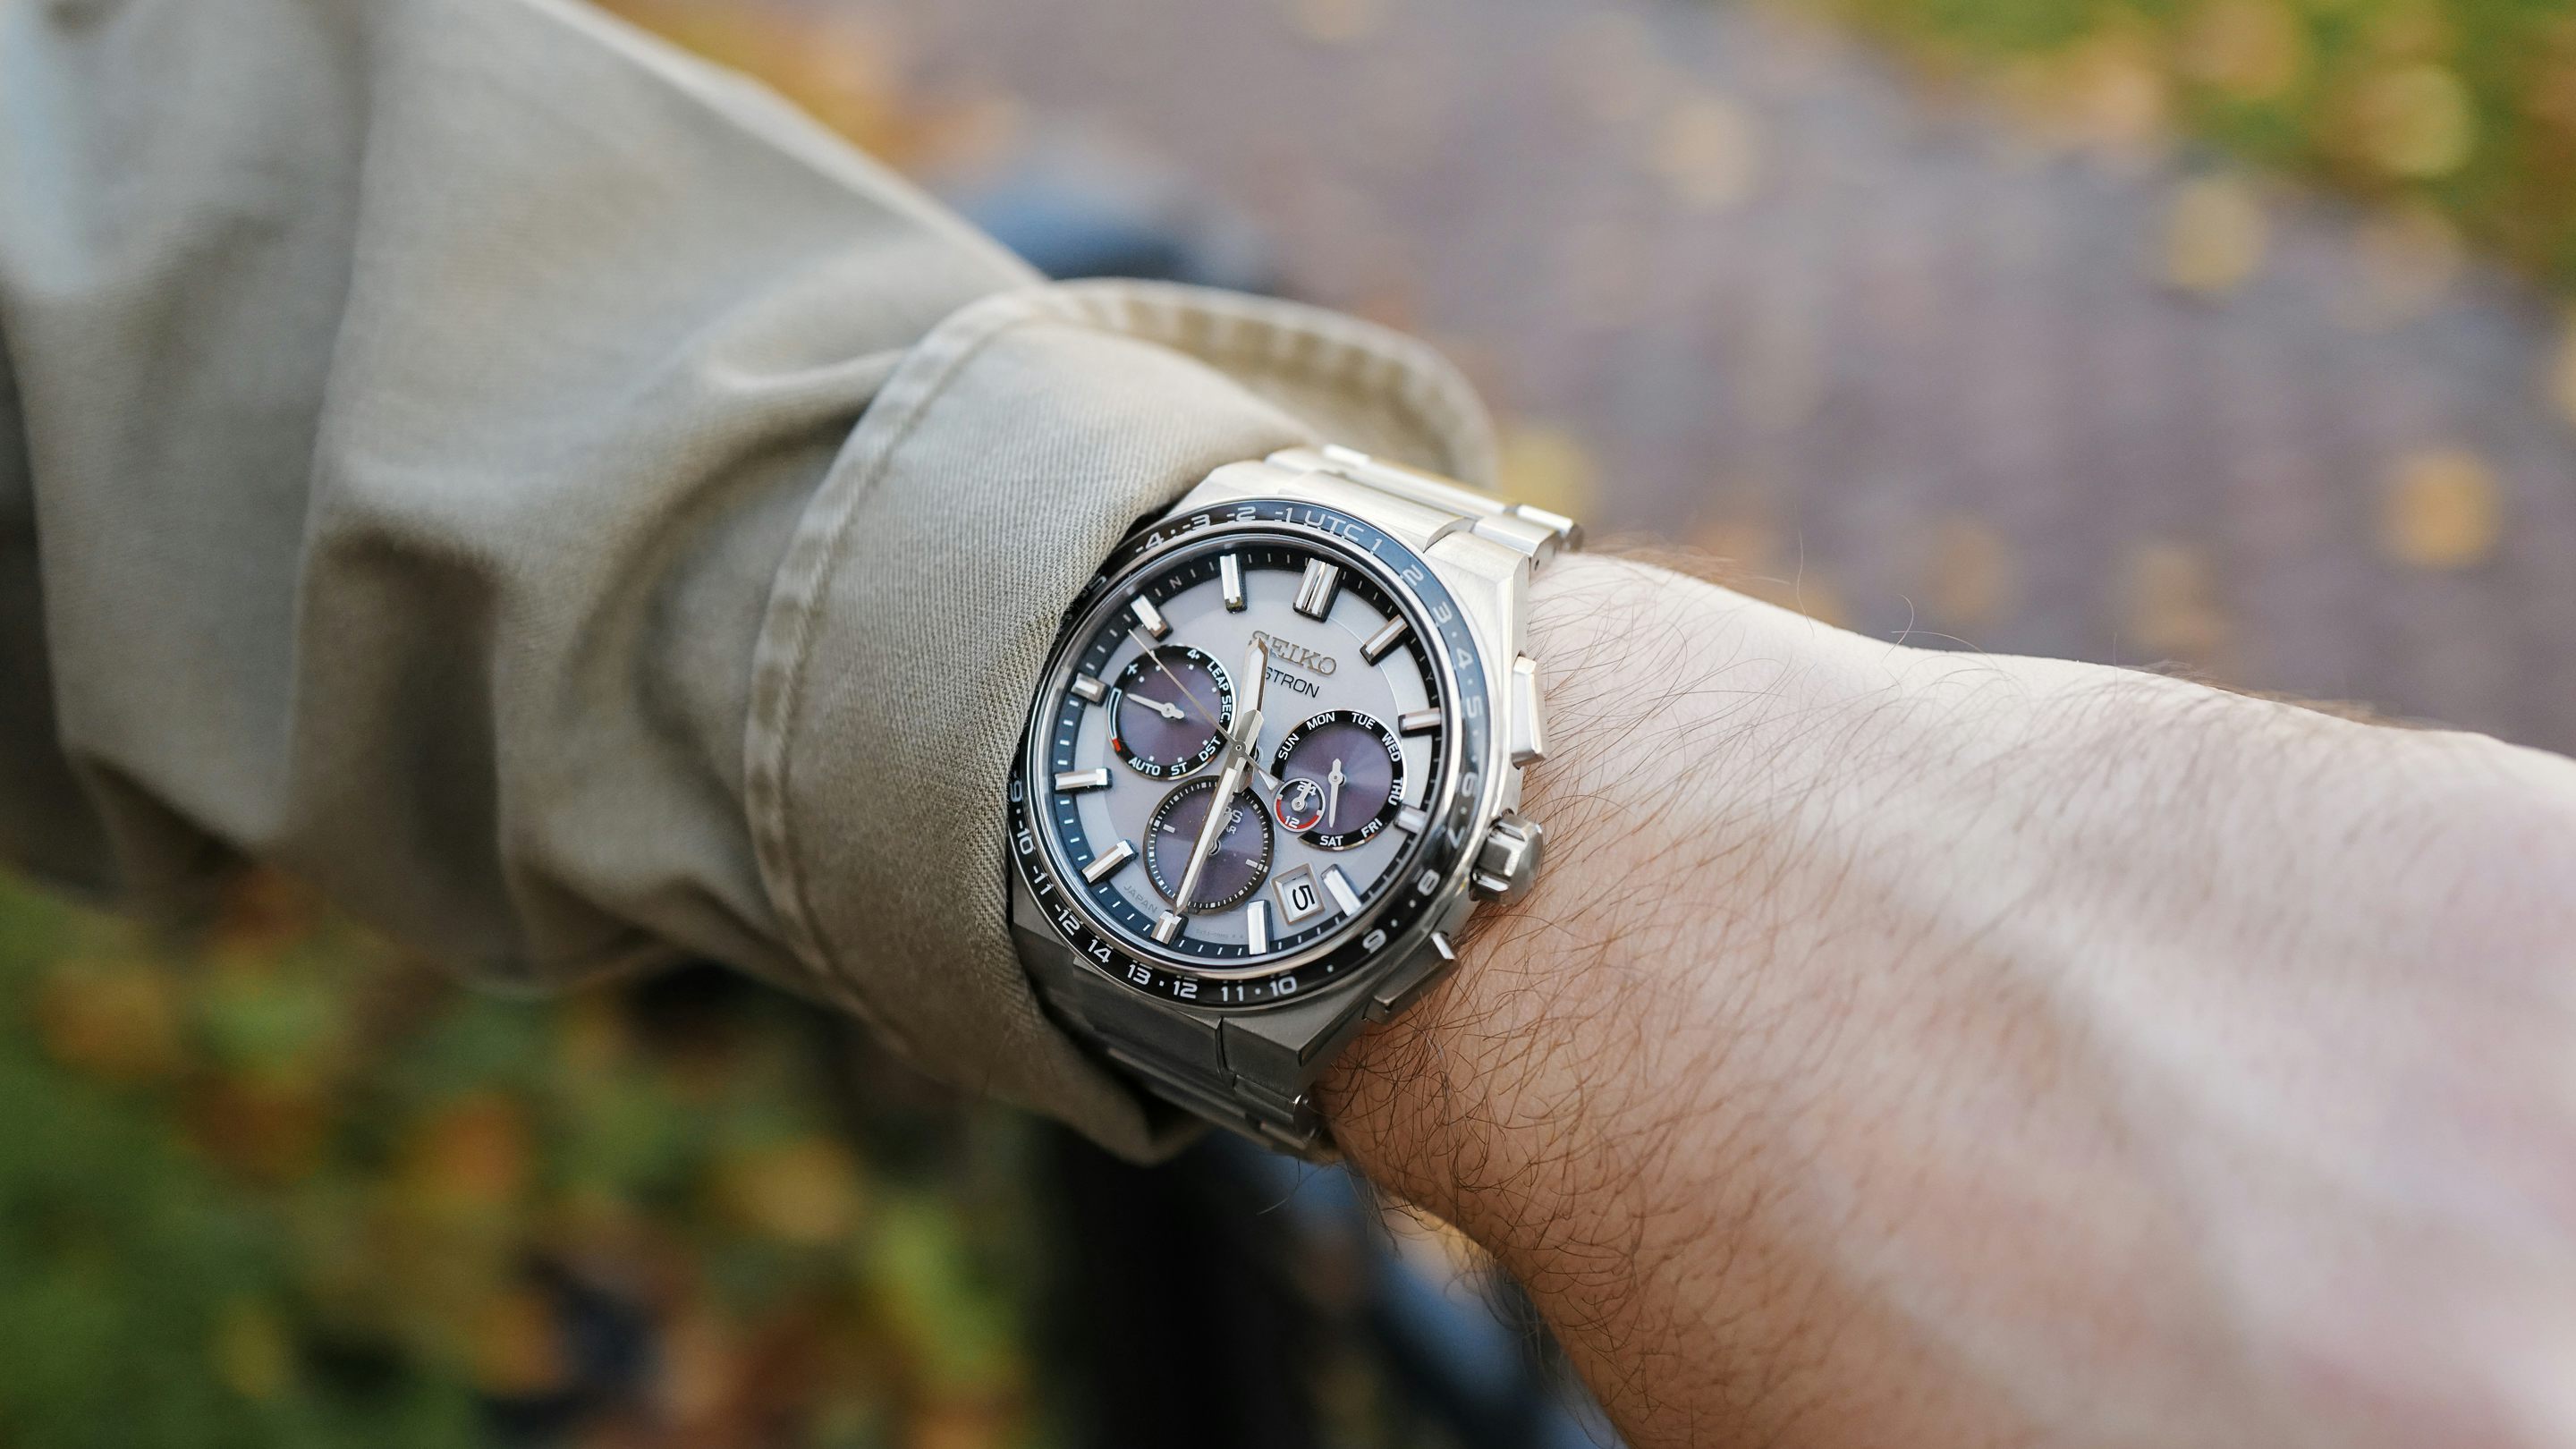 A Week on the Wrist: The Seiko Astron Video Review